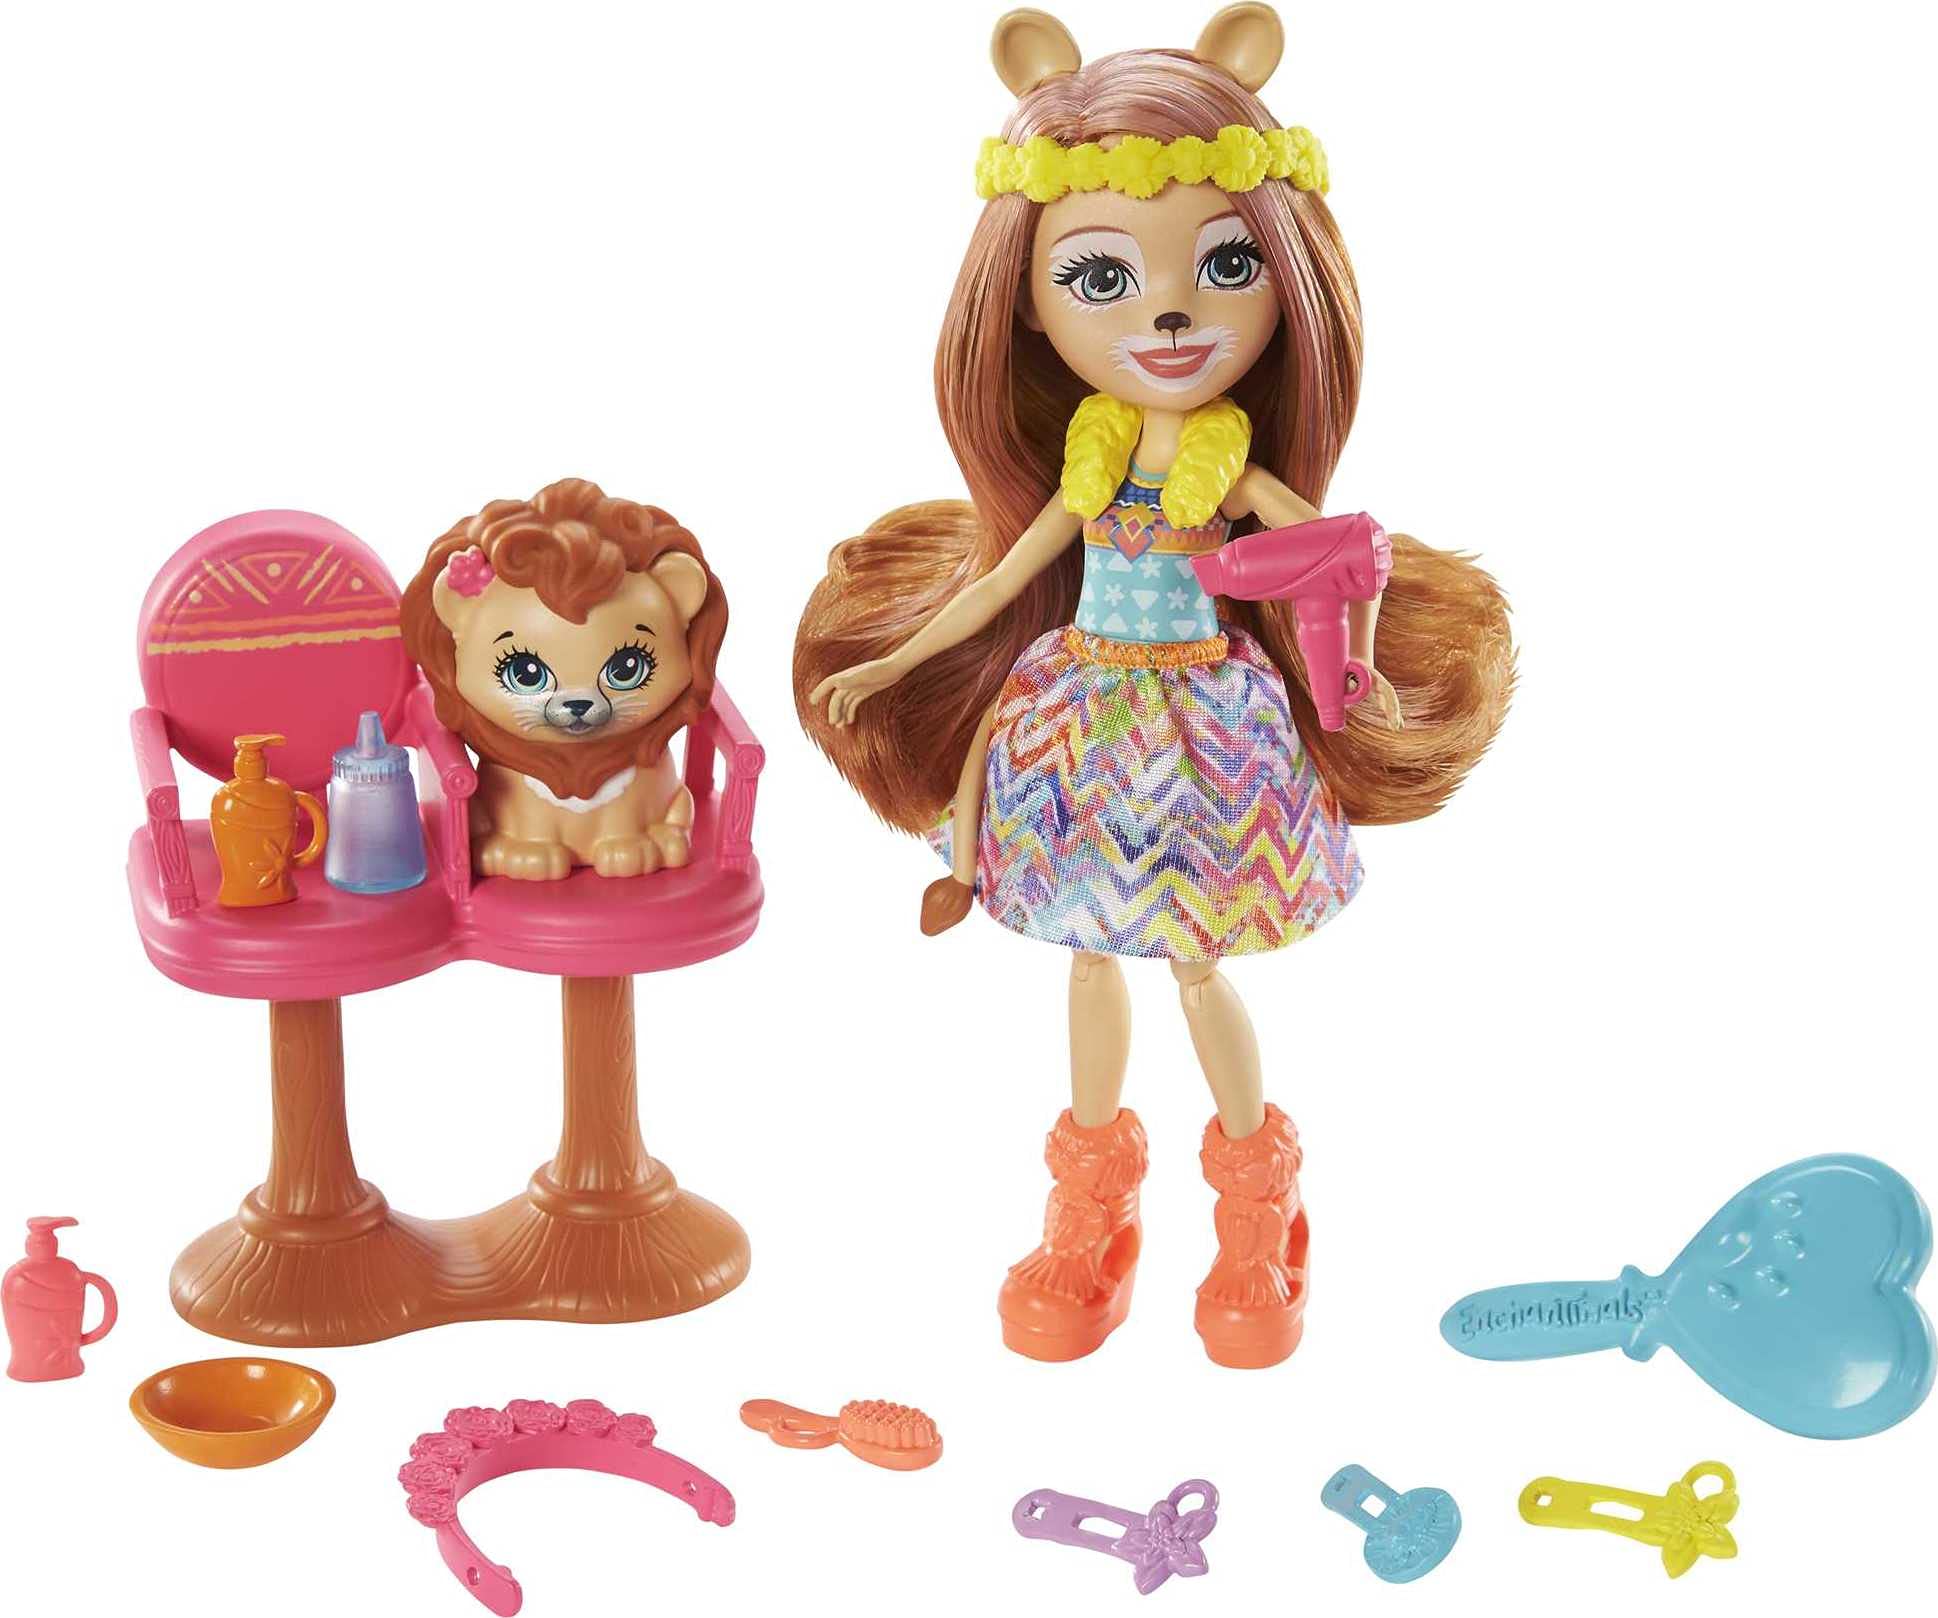 Enchantimals Stylin’ Salon Playset Lacey Lion (6-in) & Manesy with 13 Accessories, Sunny Savanna Collection, Just Add Water for Color-Change Hairstyle Fun, Great Gift for 3 to 8 Year Old Kids